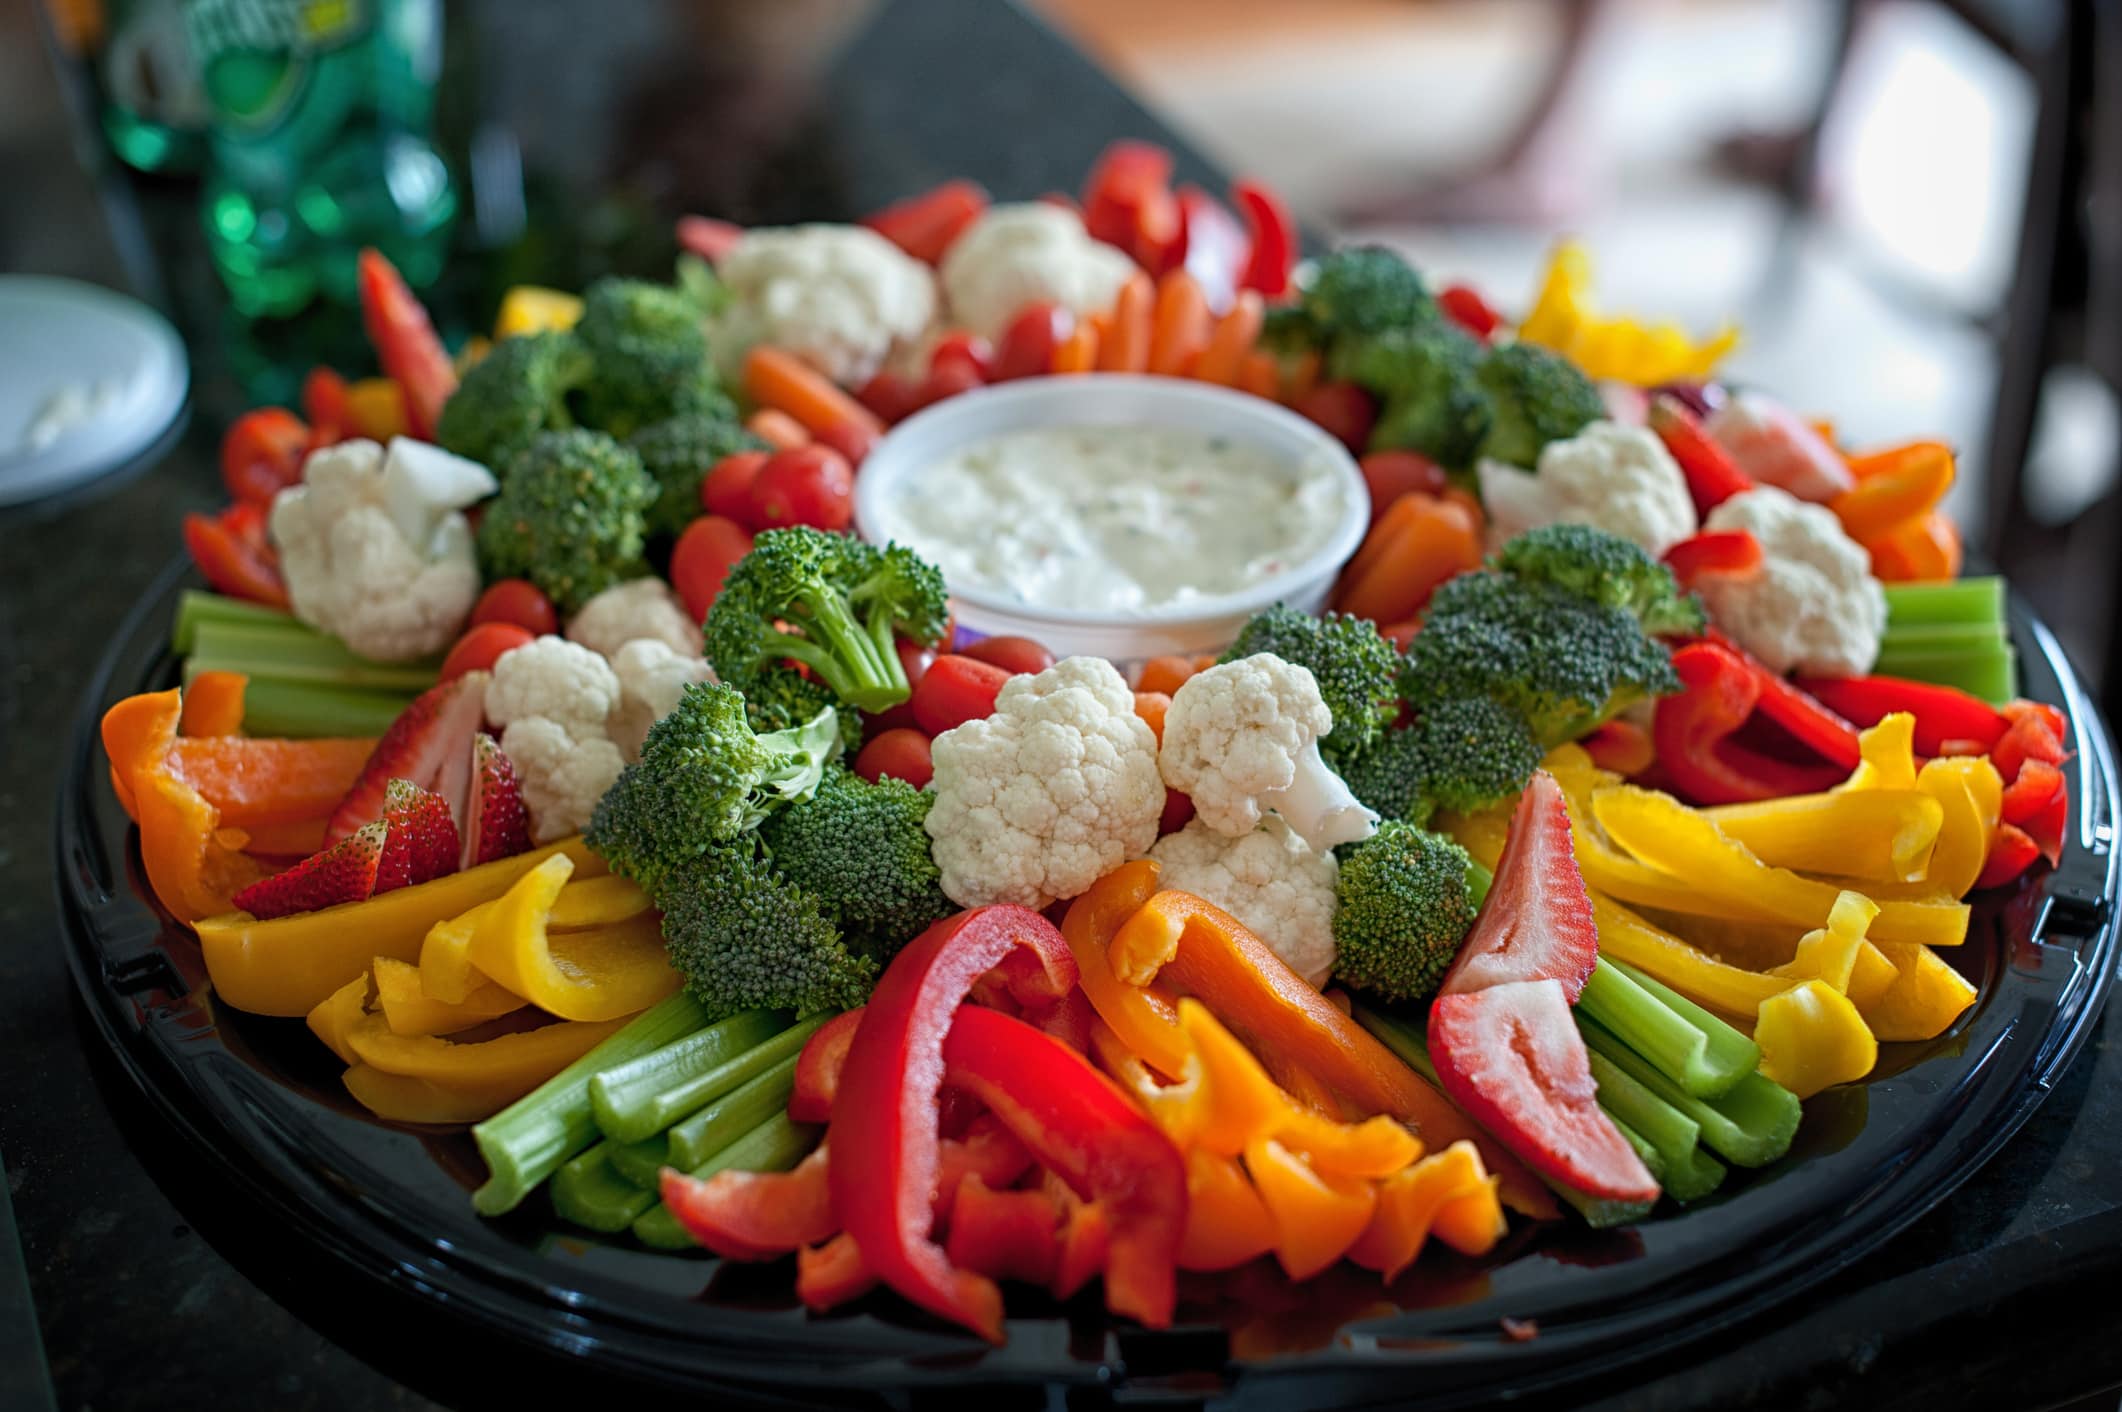 A fresh tray of colourful vegetables with dip.